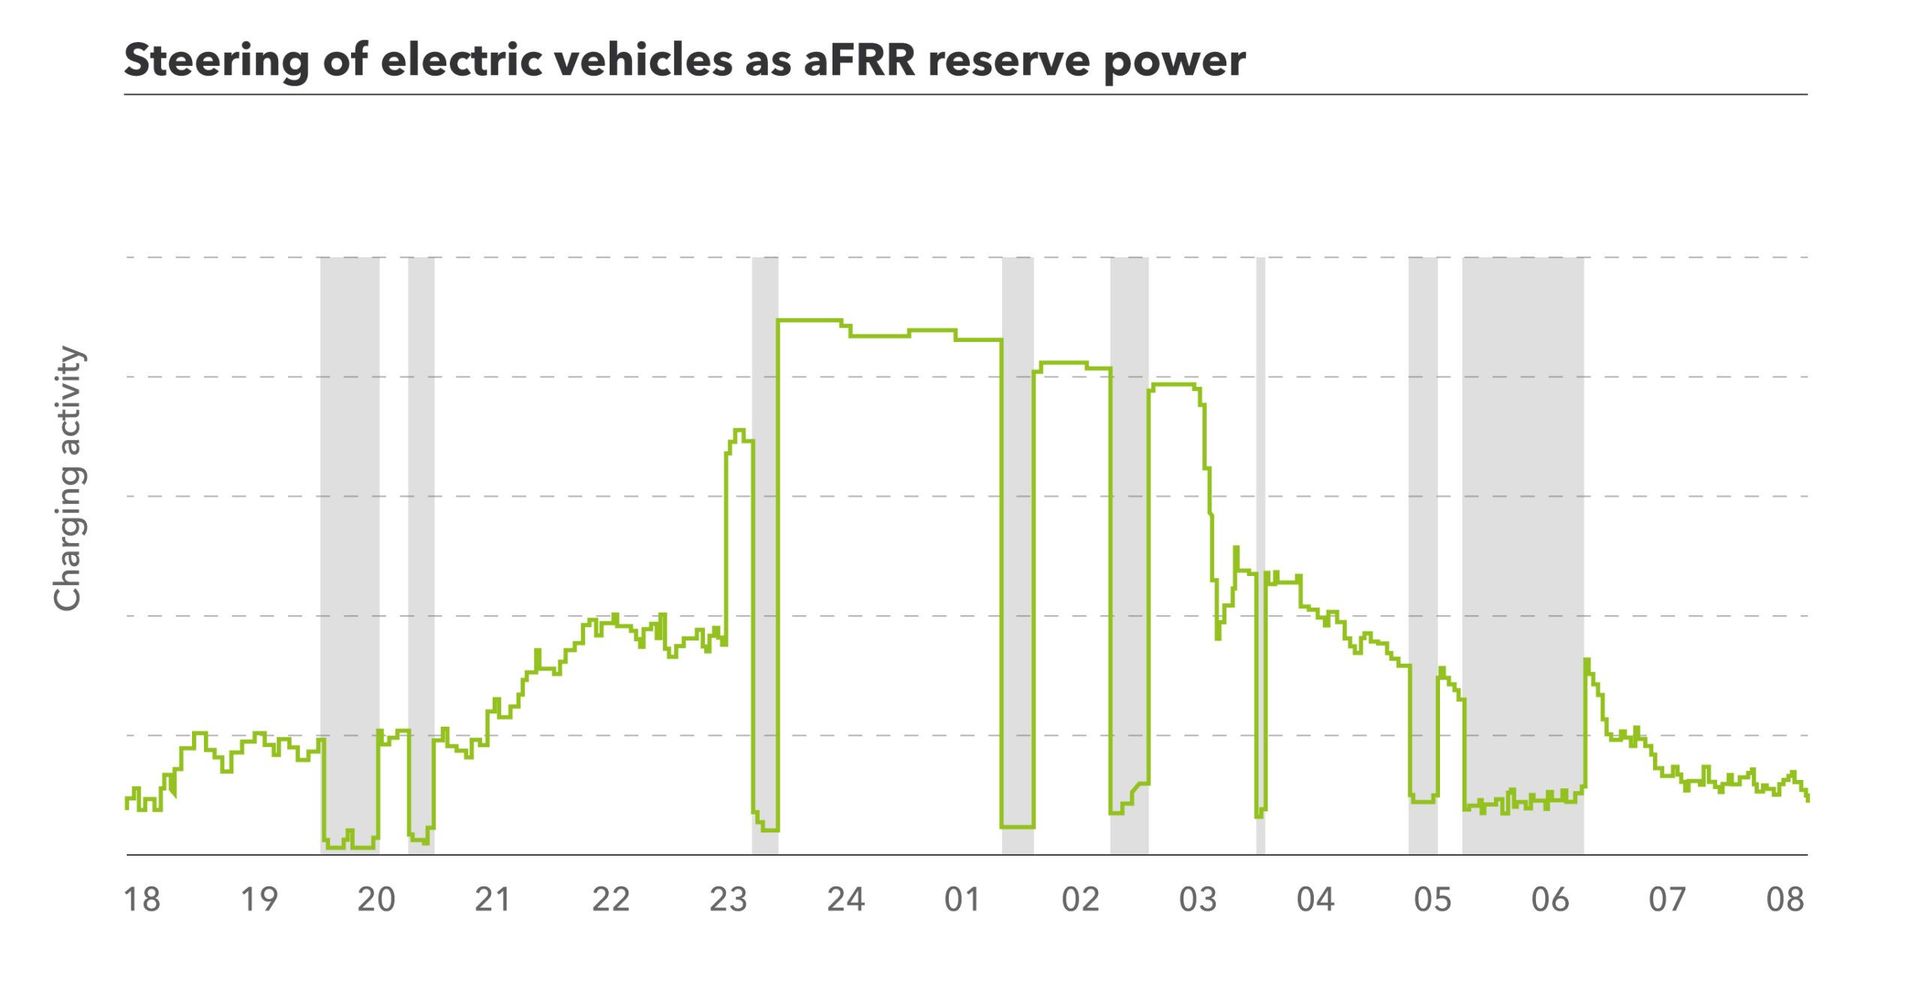 Graph that shows the steering of electric vehicles as aFRR reserve power